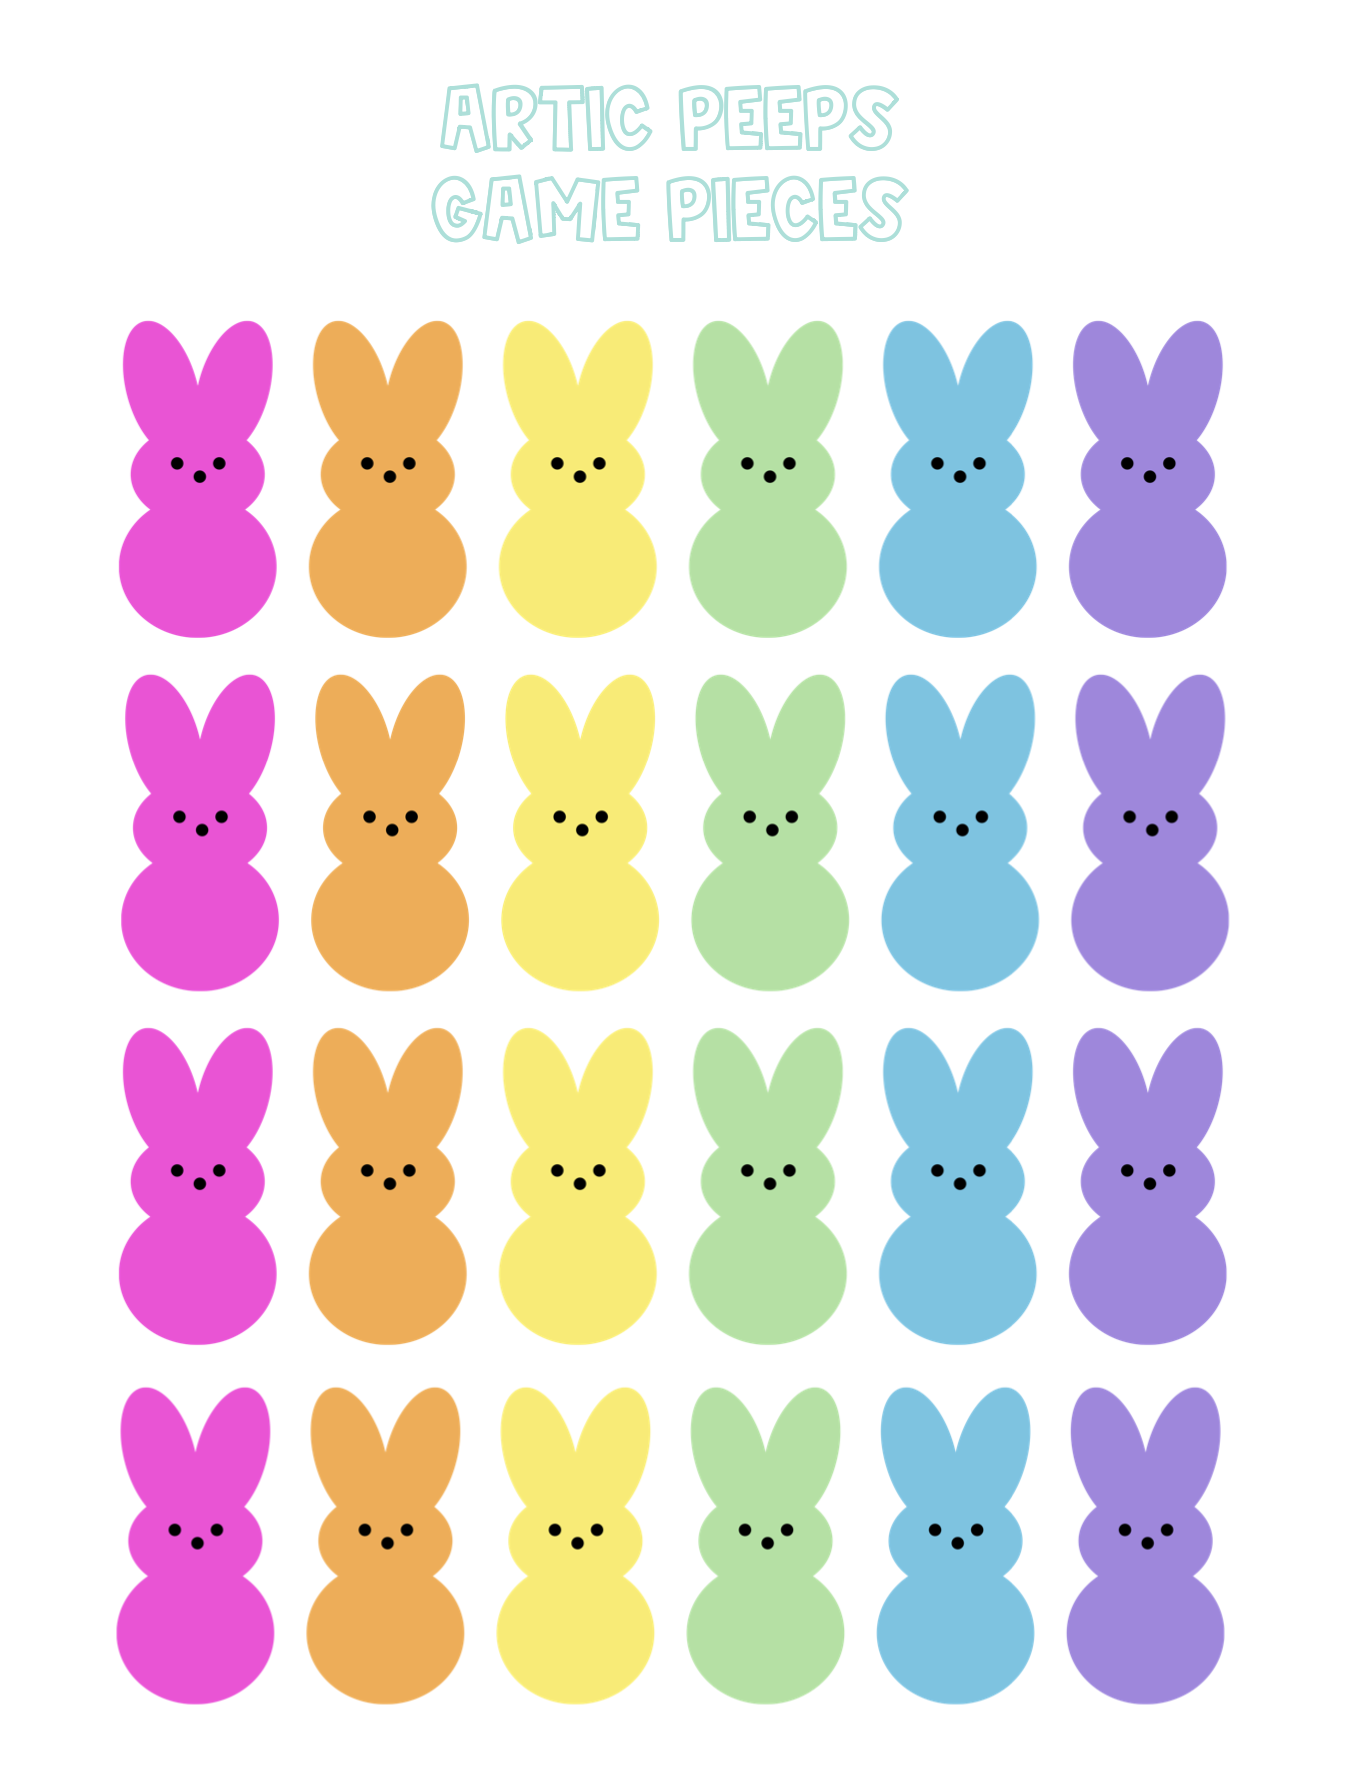 24 colorful peeps in a row